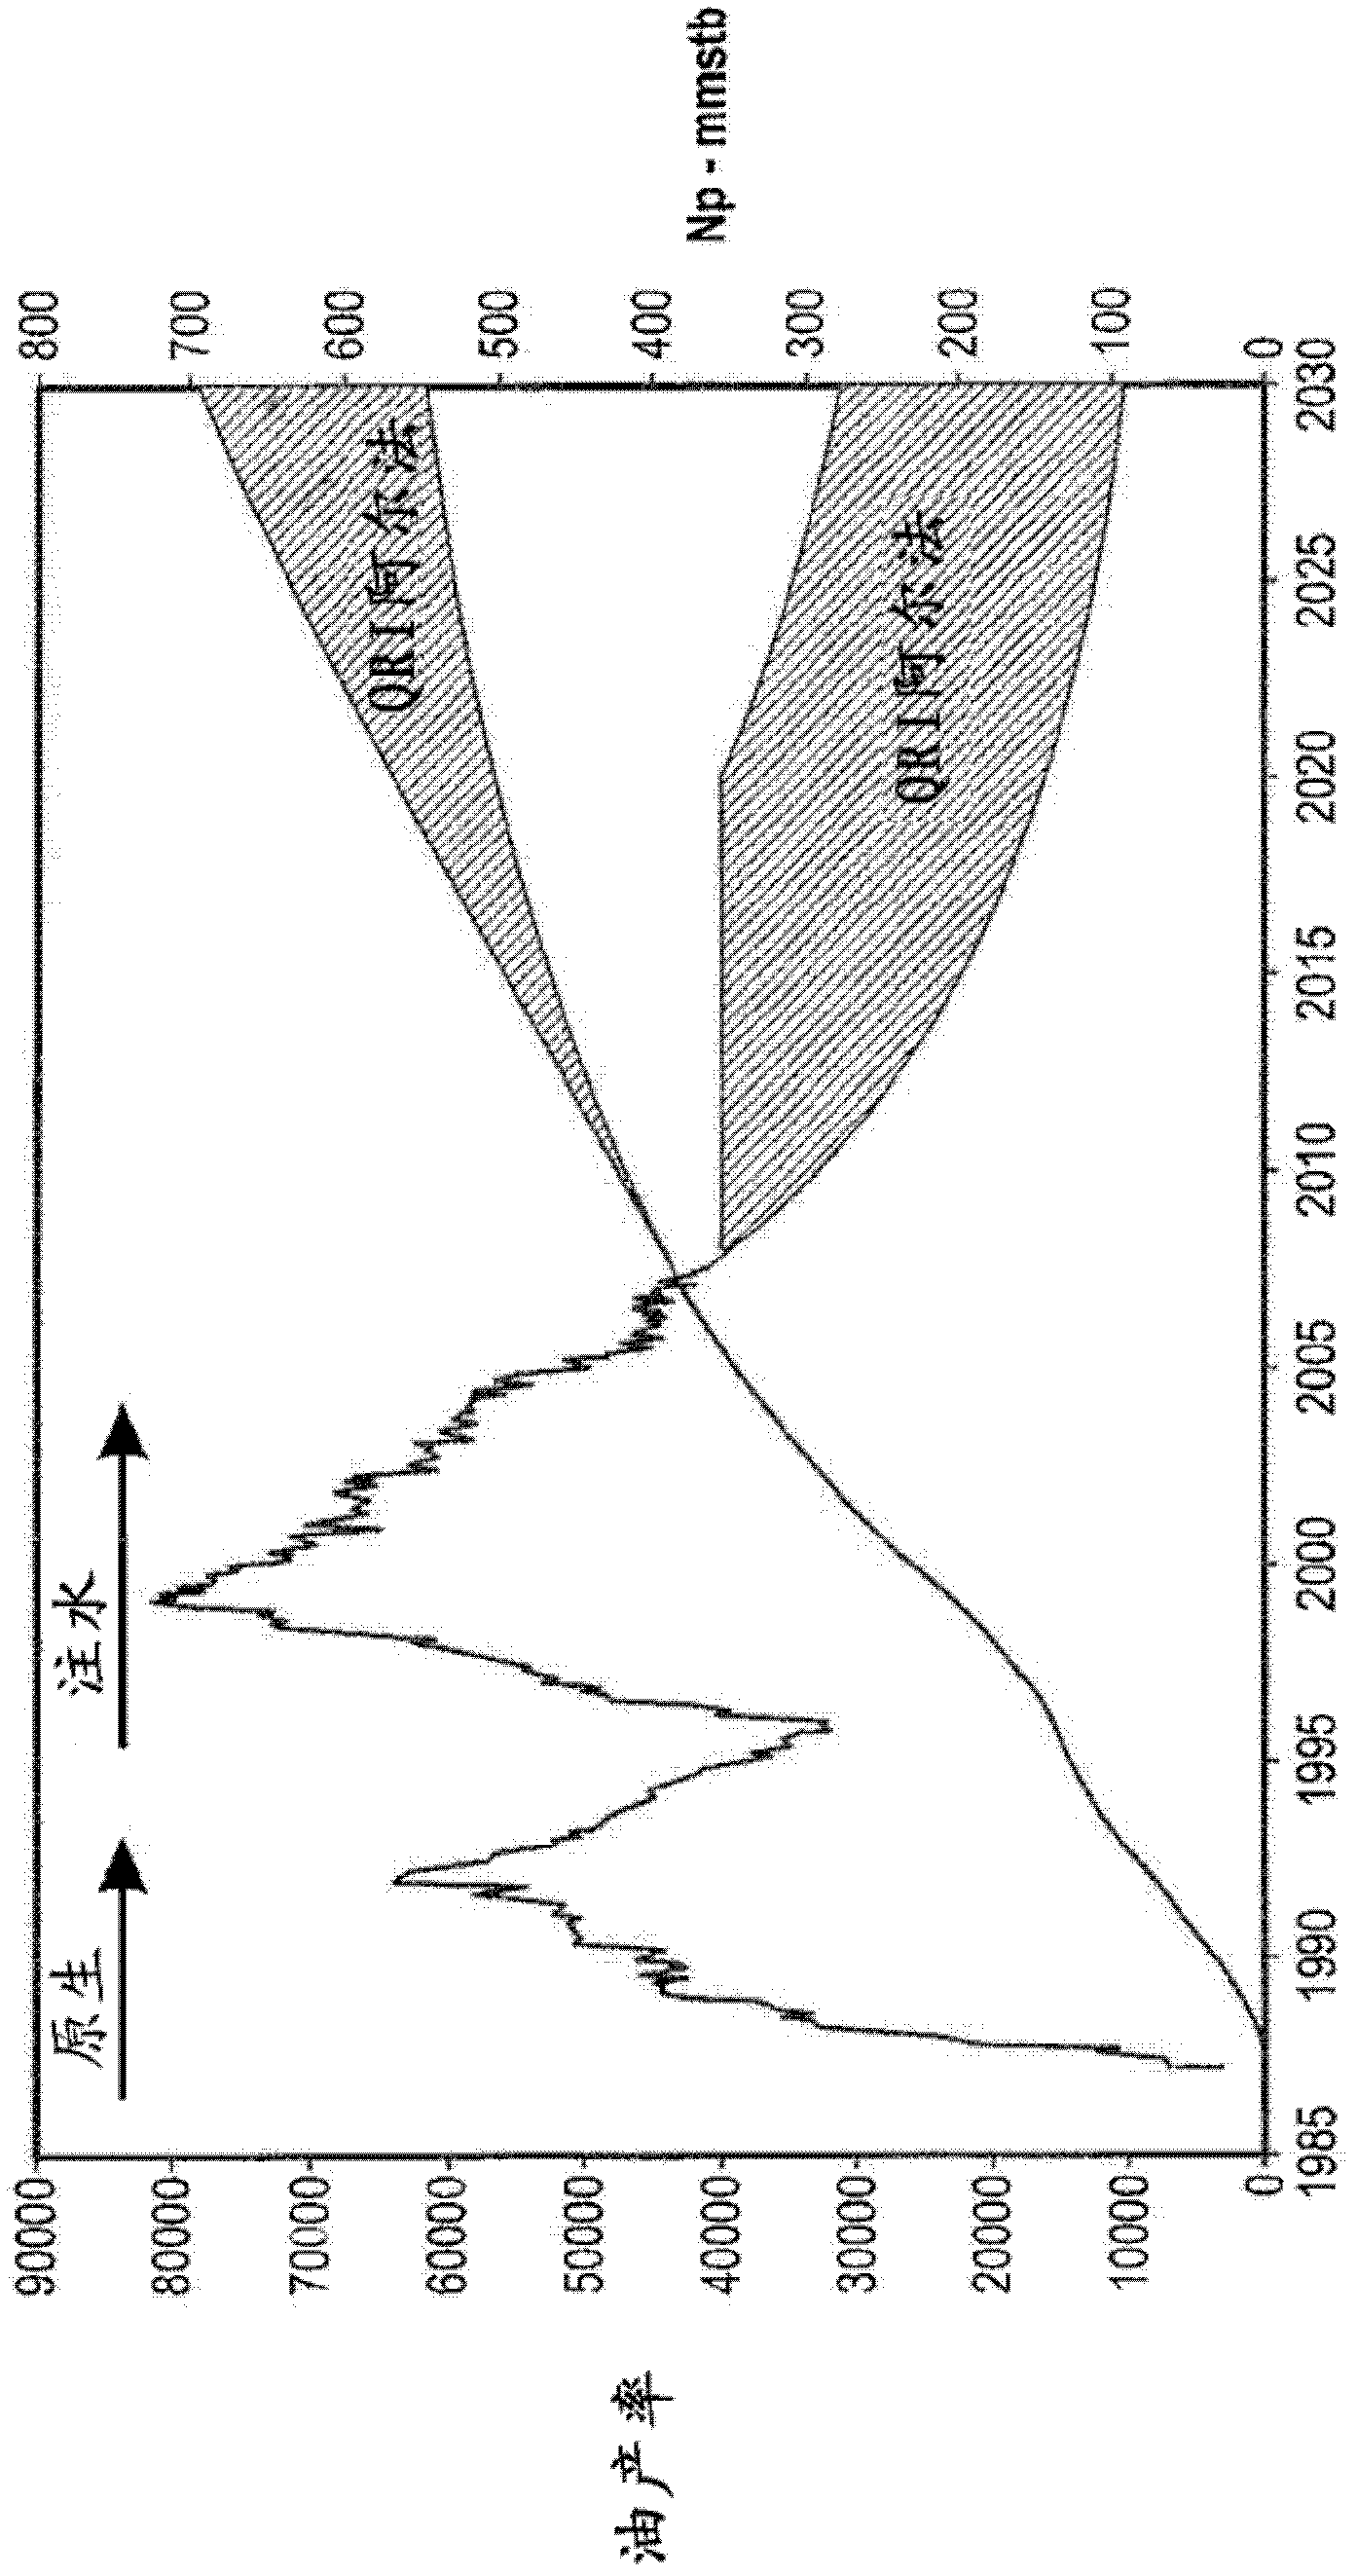 Method for dynamically assessing petroleum reservoir competency and increasing production and recovery through asymmetric analysis of performance metrics